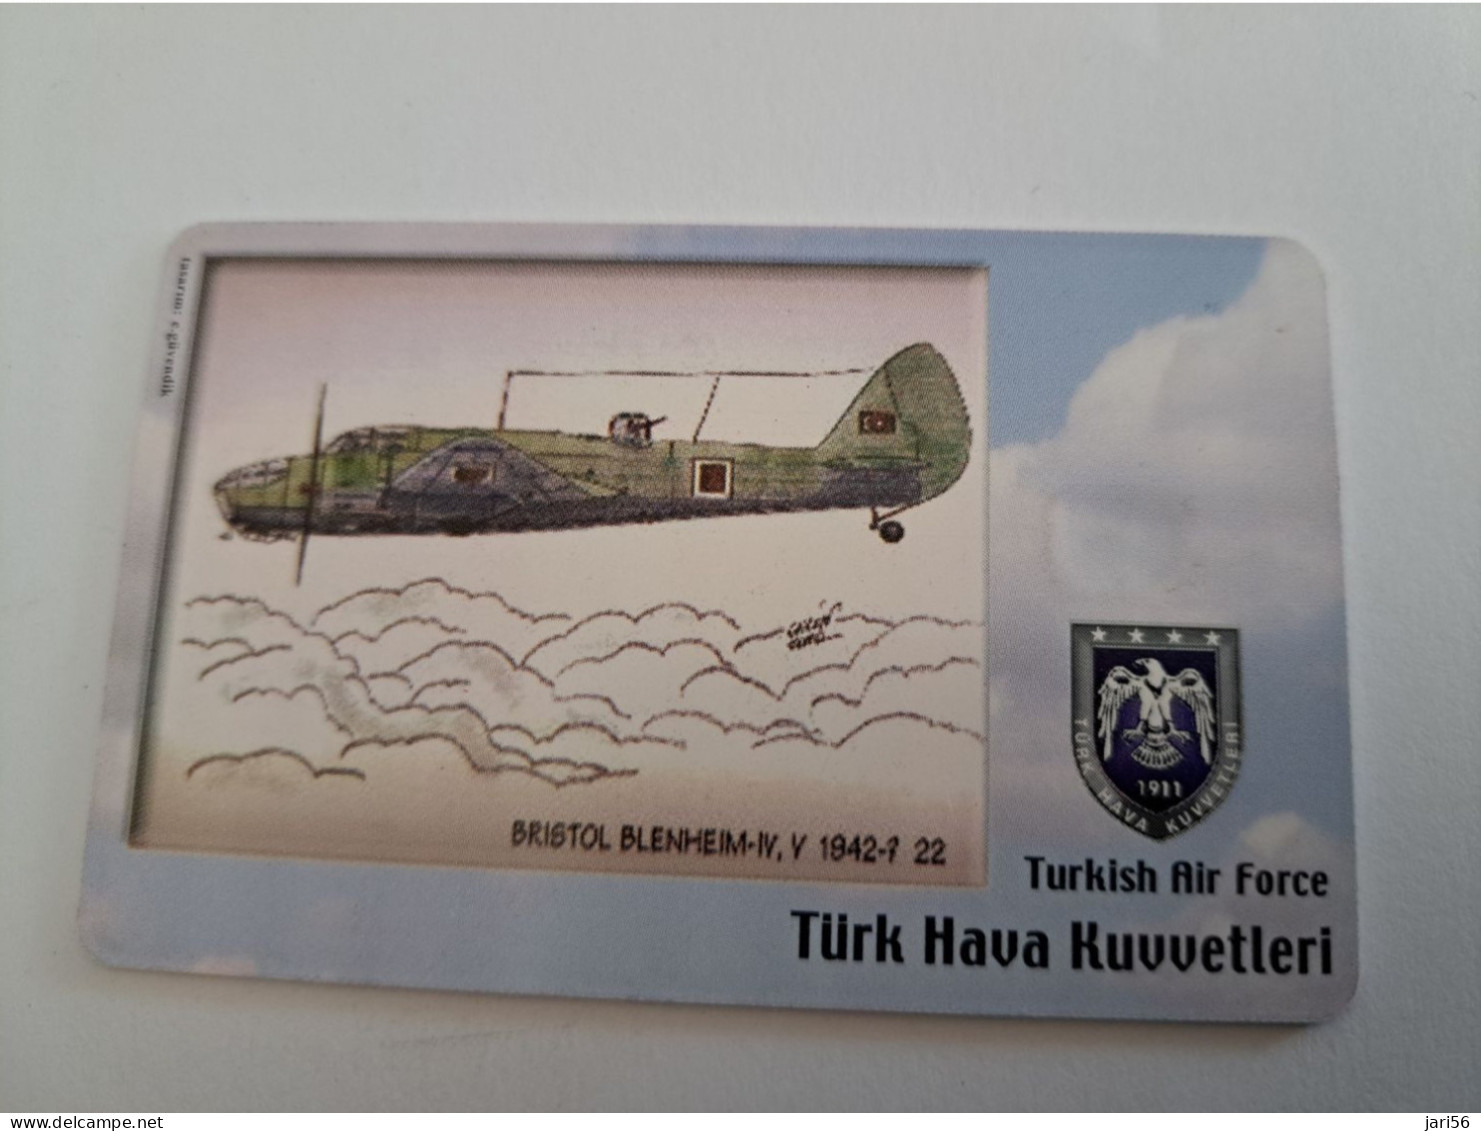 TURKIJE / 50 UNITS/ CHIPCARD/ TURKISH AIR FORCE  / DIFFERENT PLANES /        Fine Used Card  **15407** - Turquie